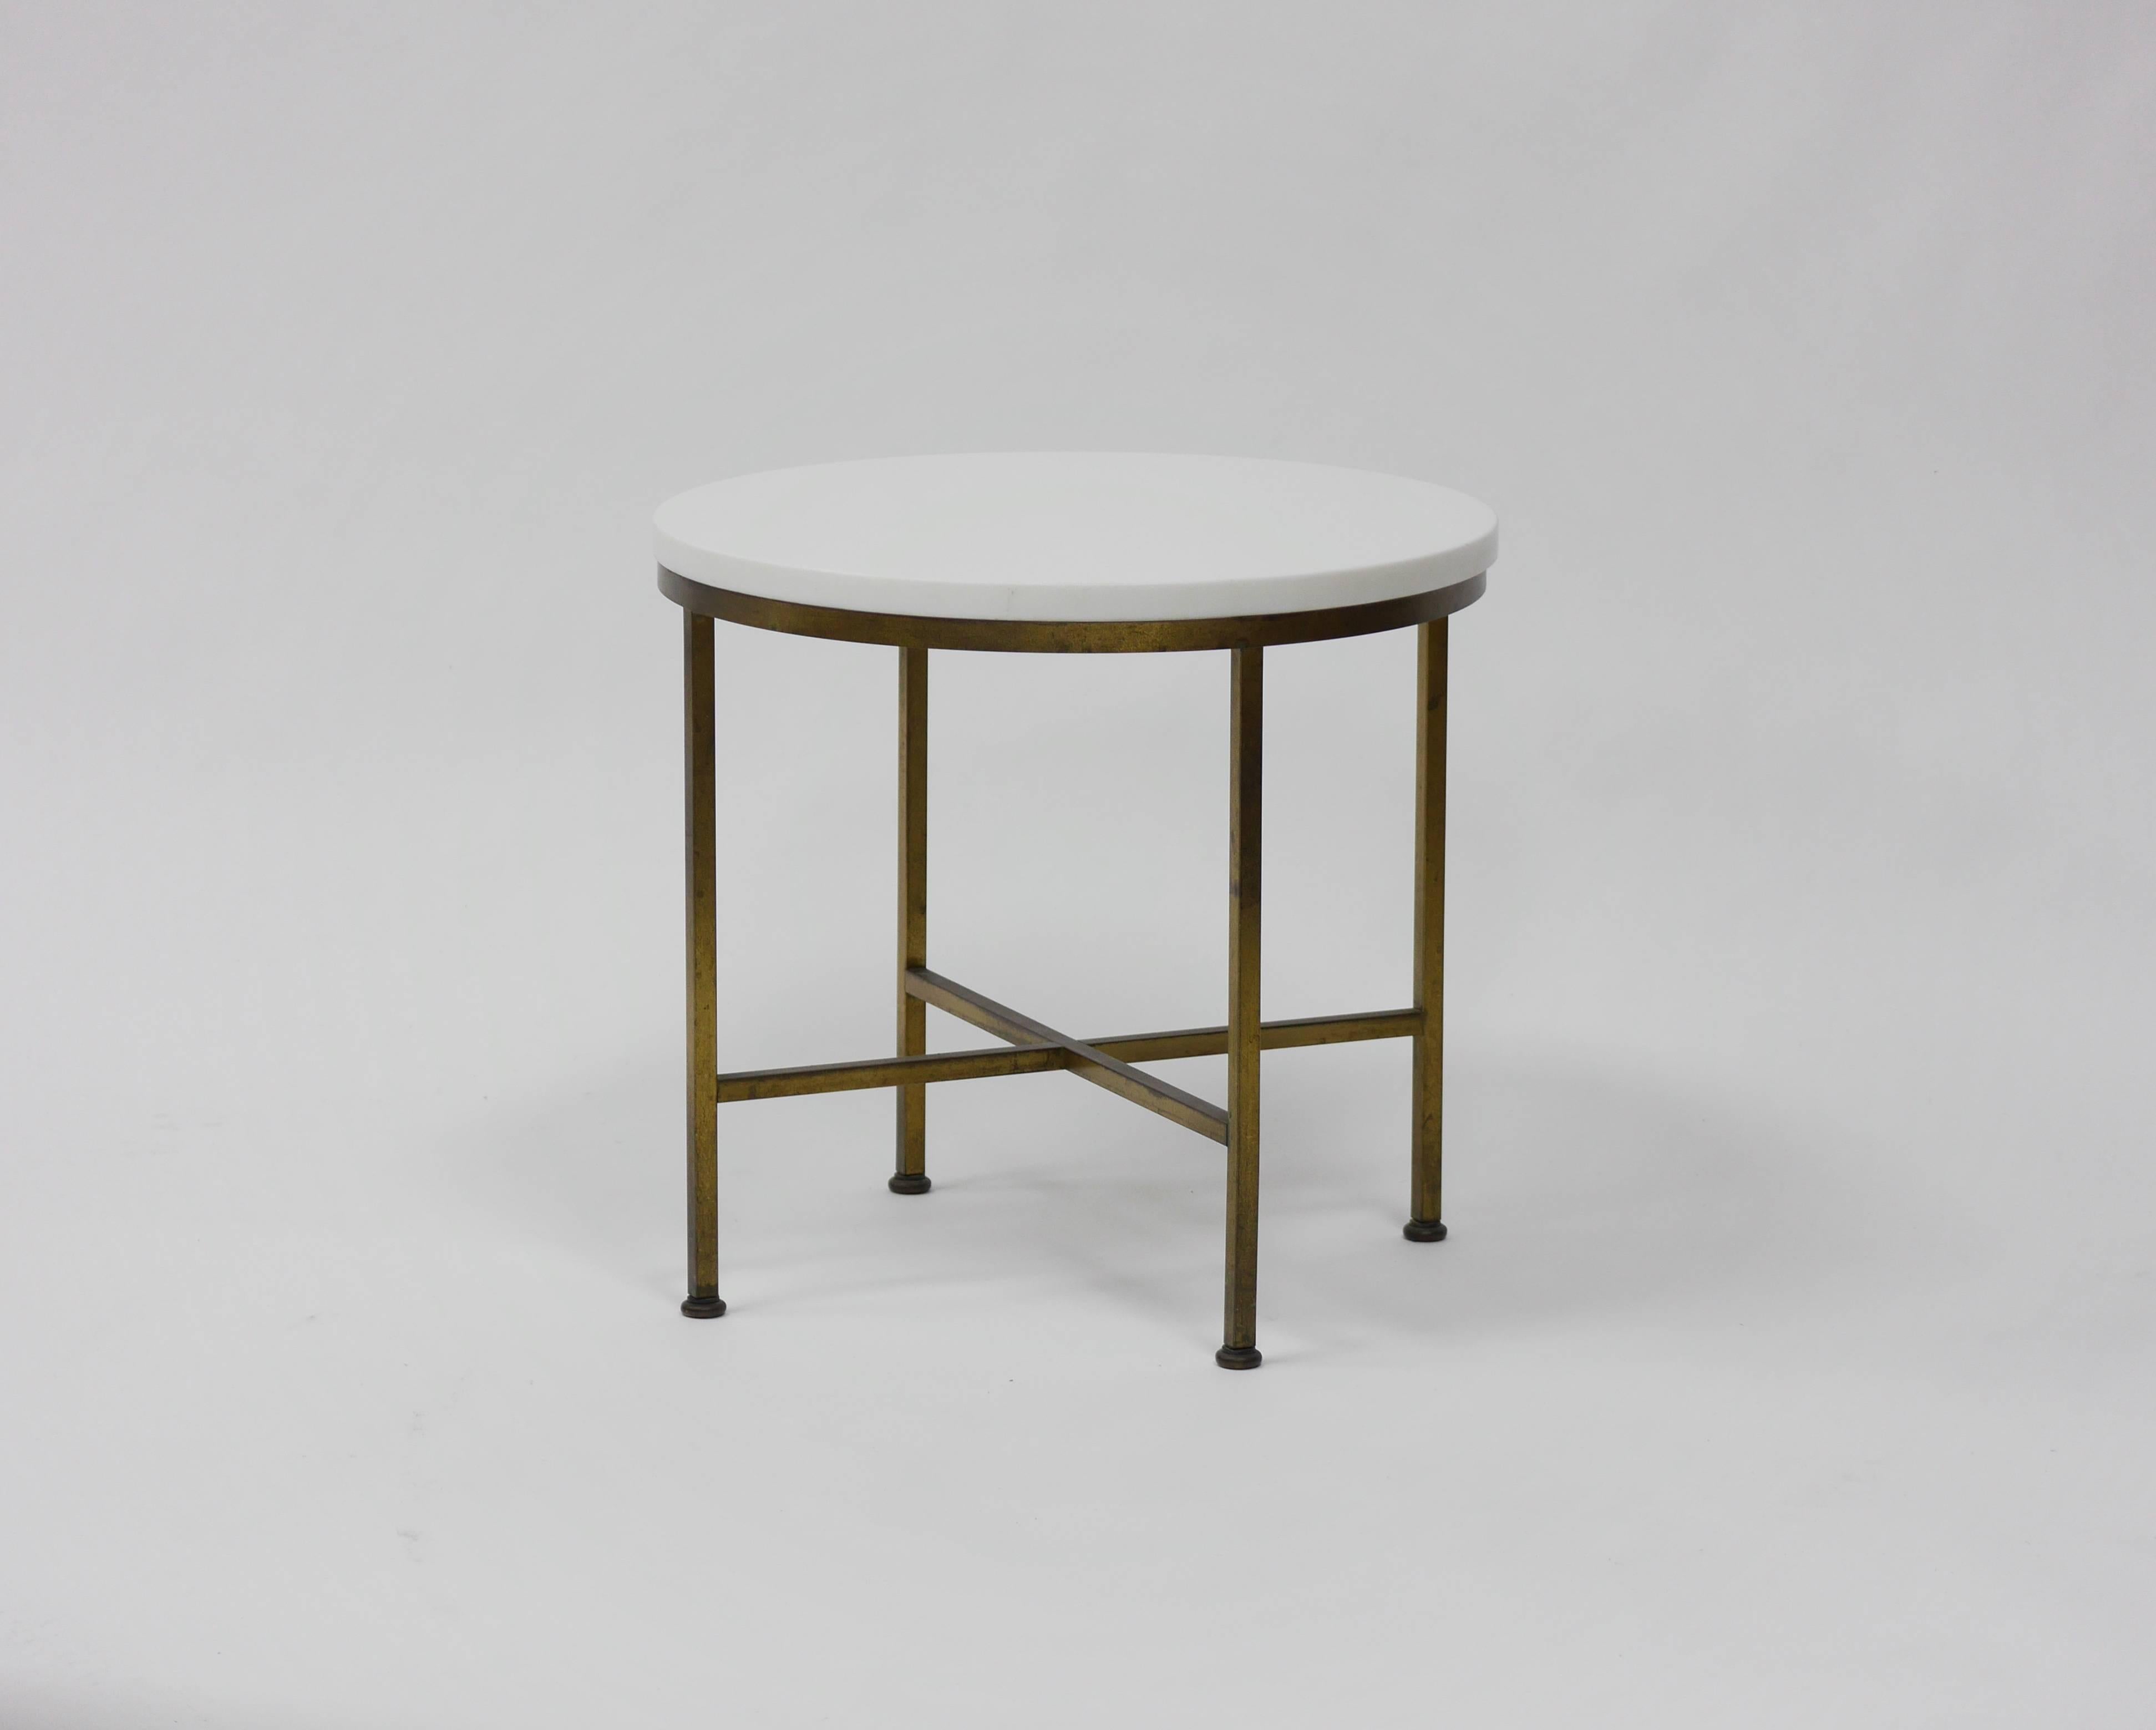 Rare to market, brass and vitrolite cigarette table by Paul McCobb. Excellent original patina to frame, 3/4